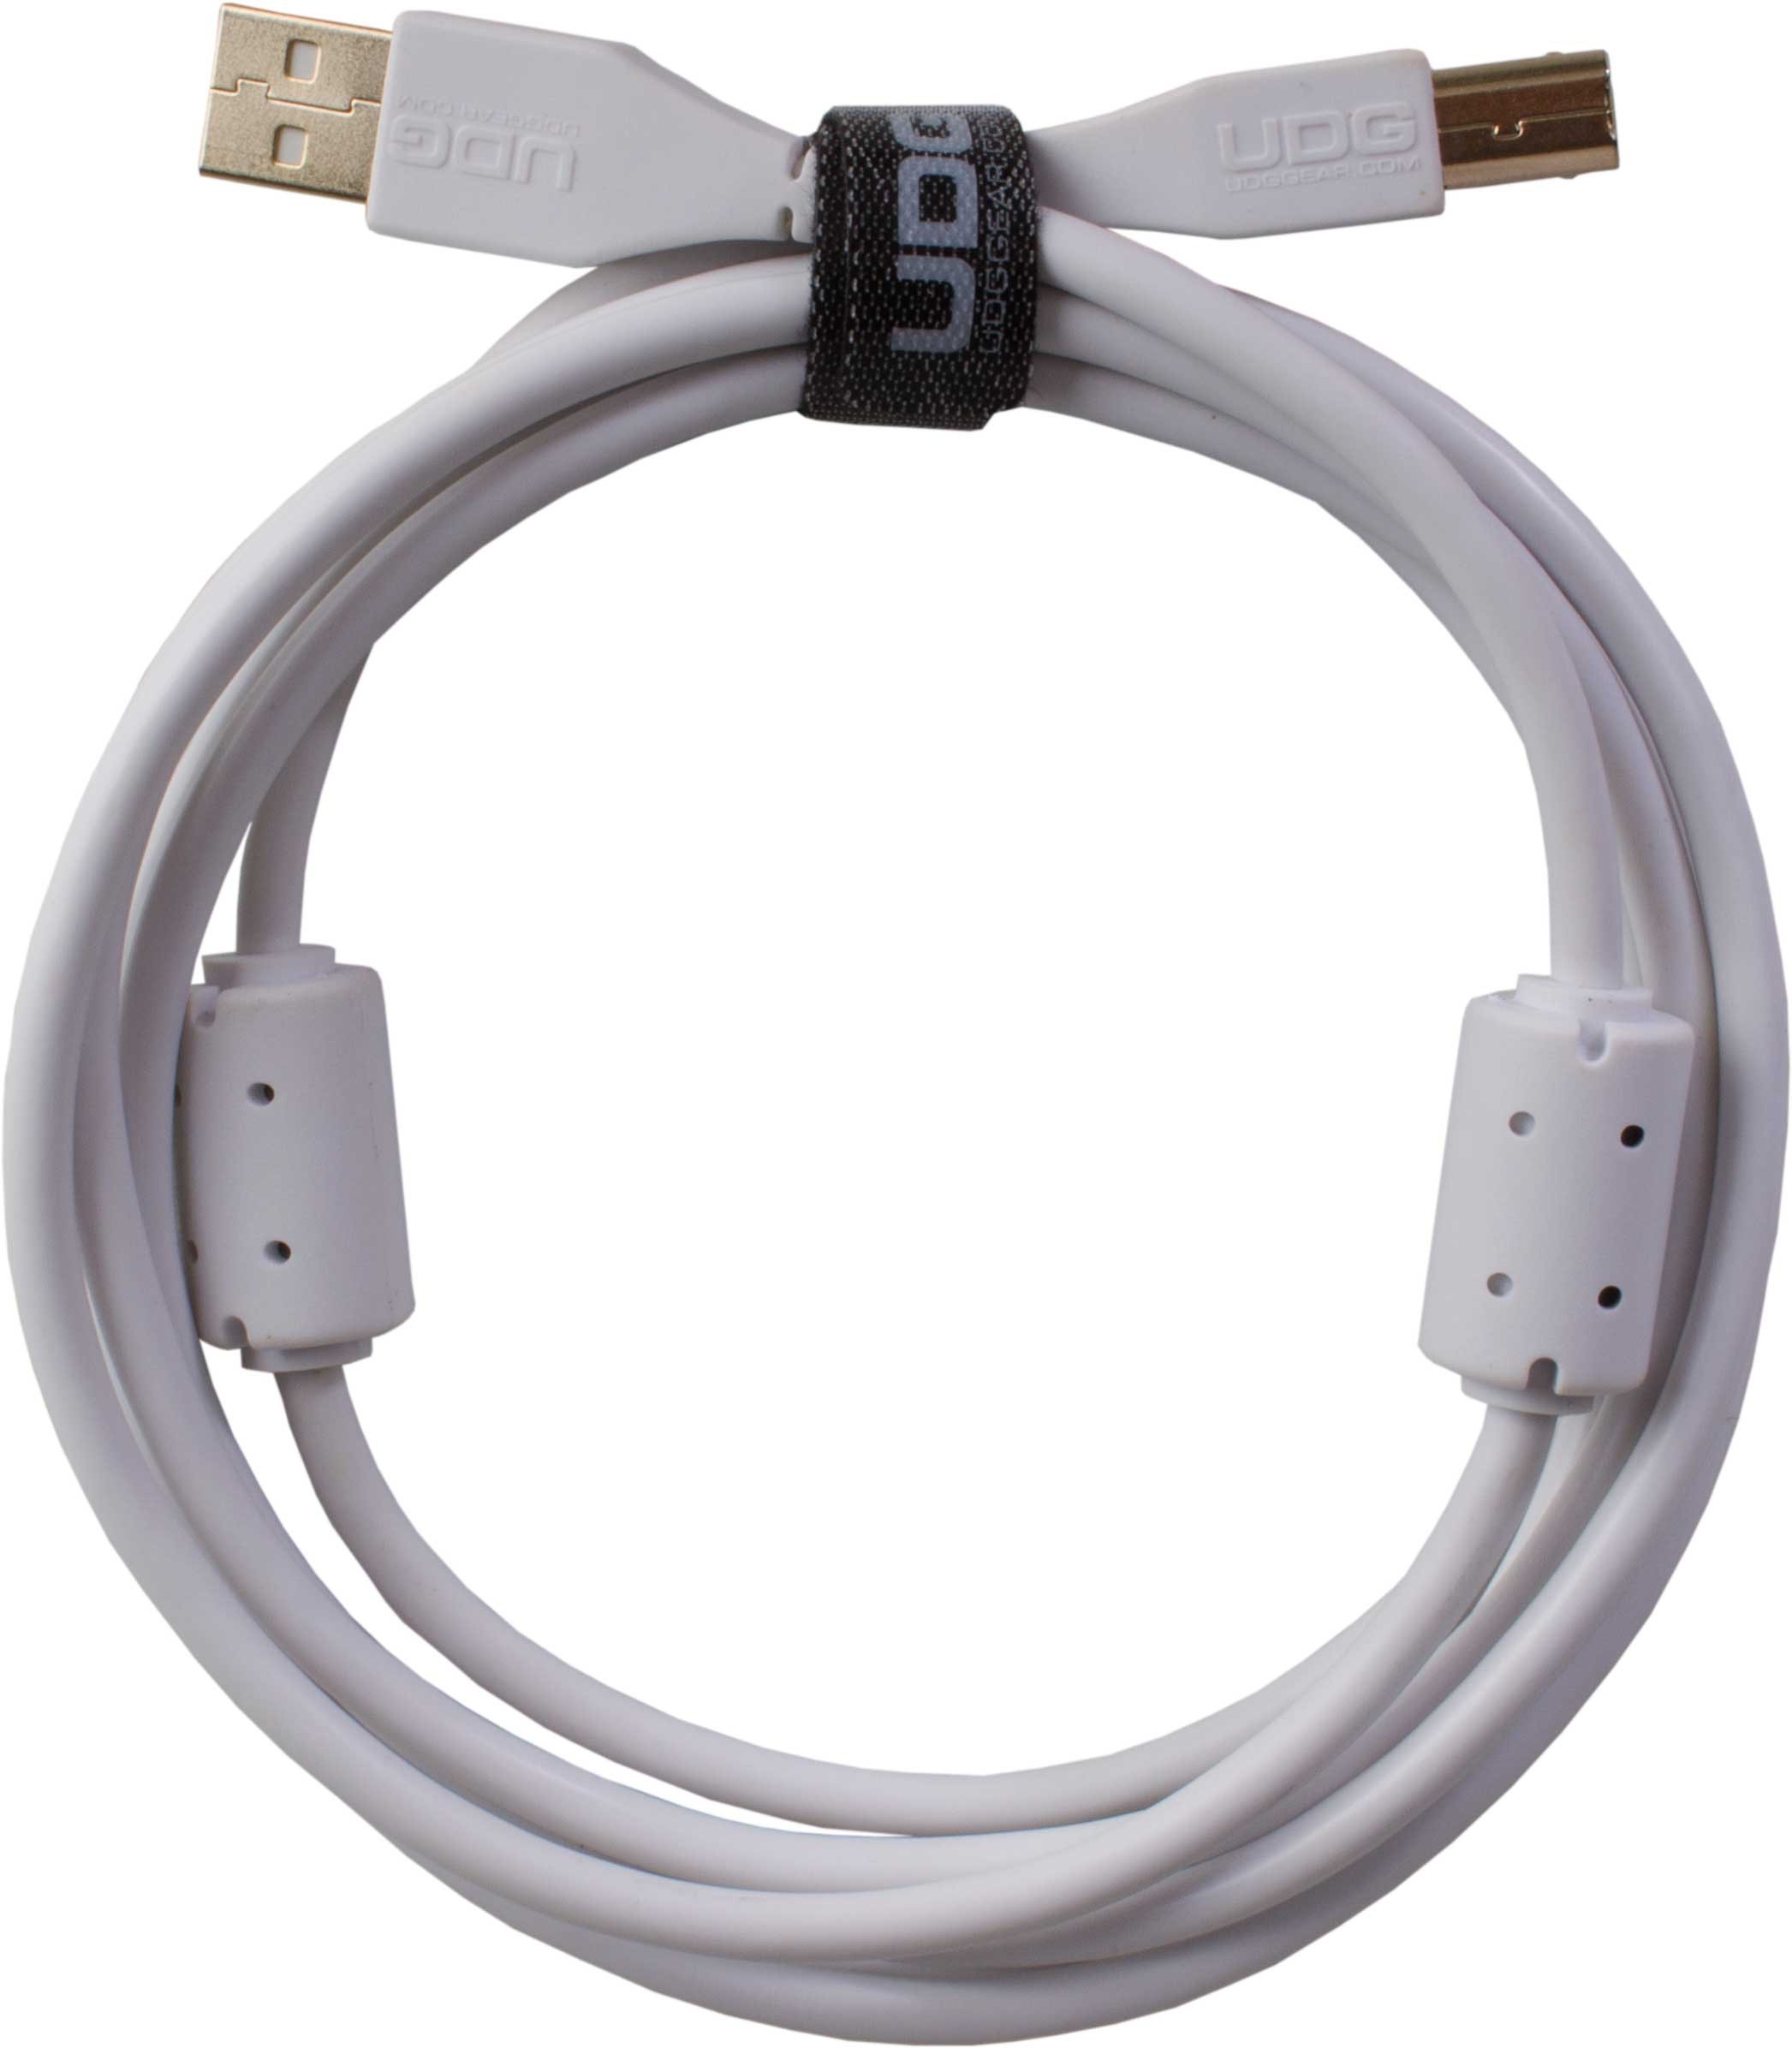 UDG U95003WH - ULTIMATE AUDIO CABLE USB 2.0 A-B WHITE STRAIGHT  3M